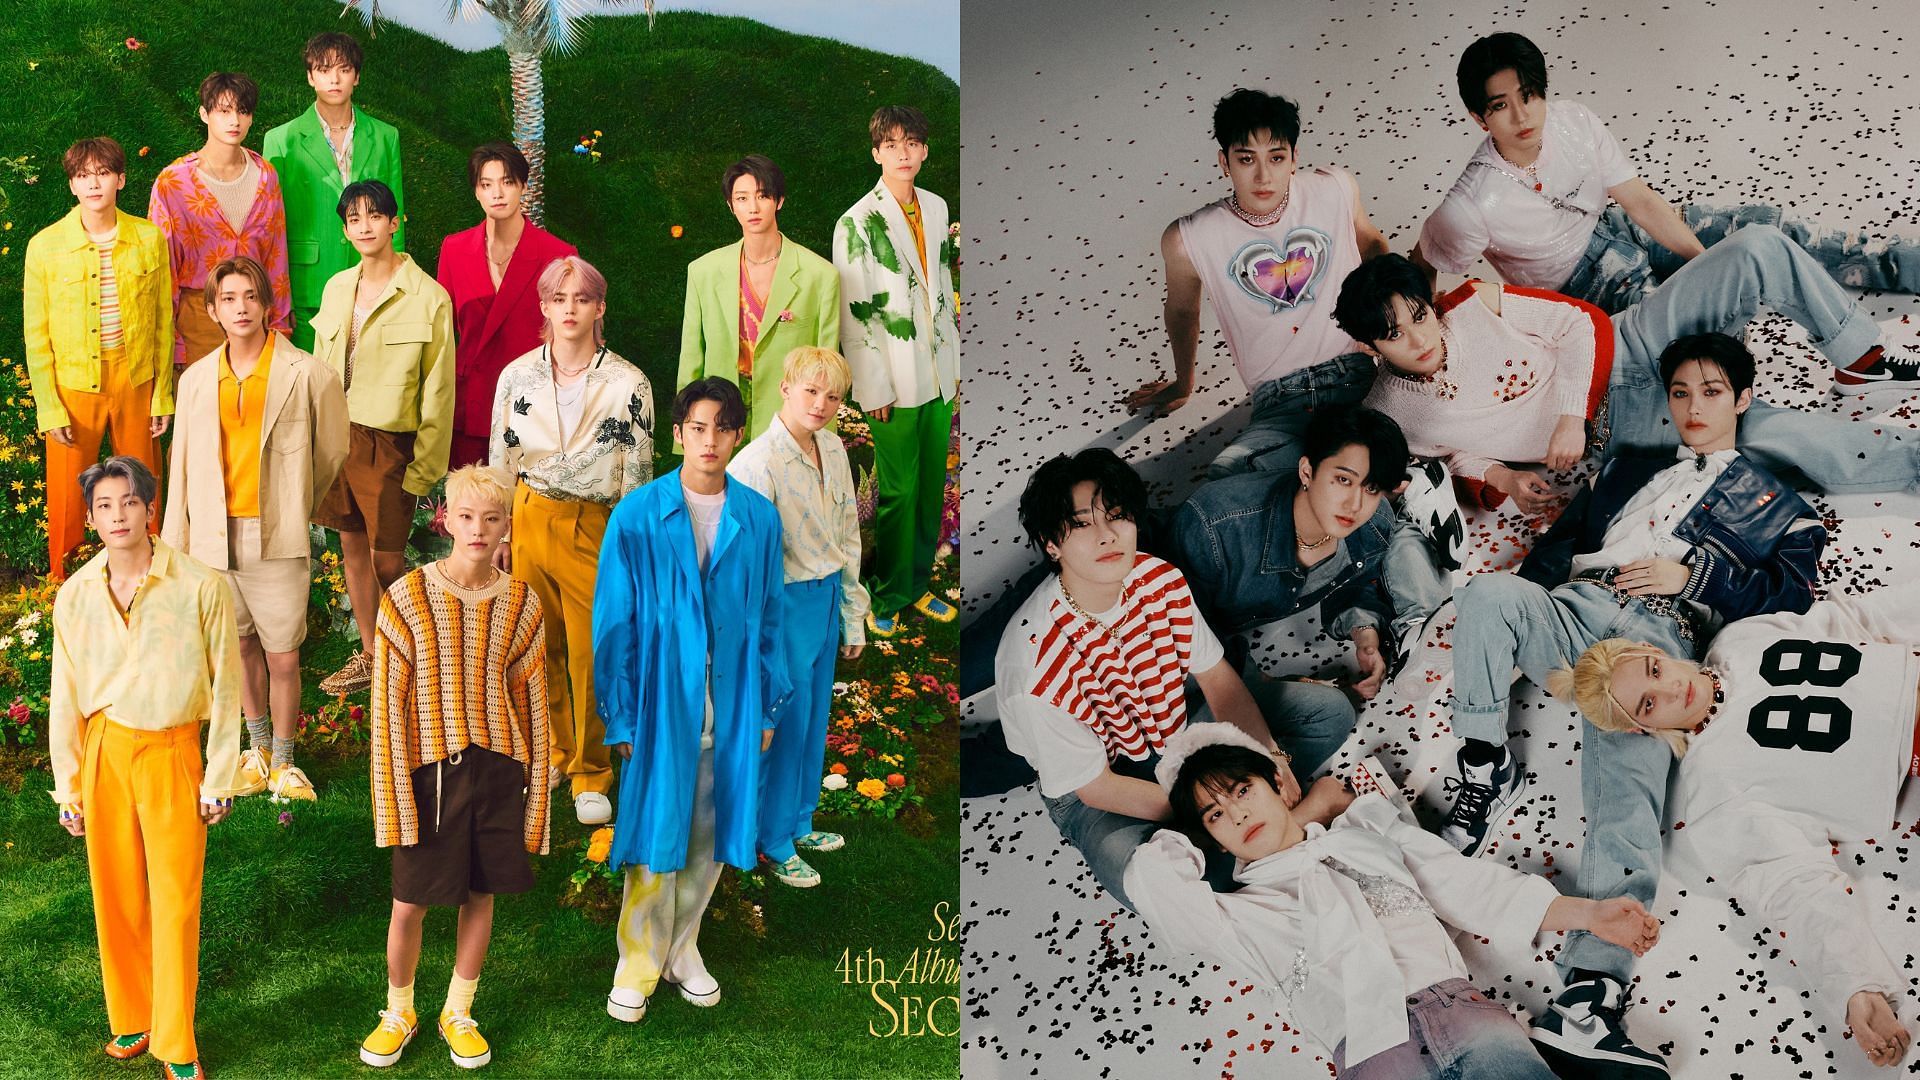 SEVENTEEN, Stray Kids, and more groups